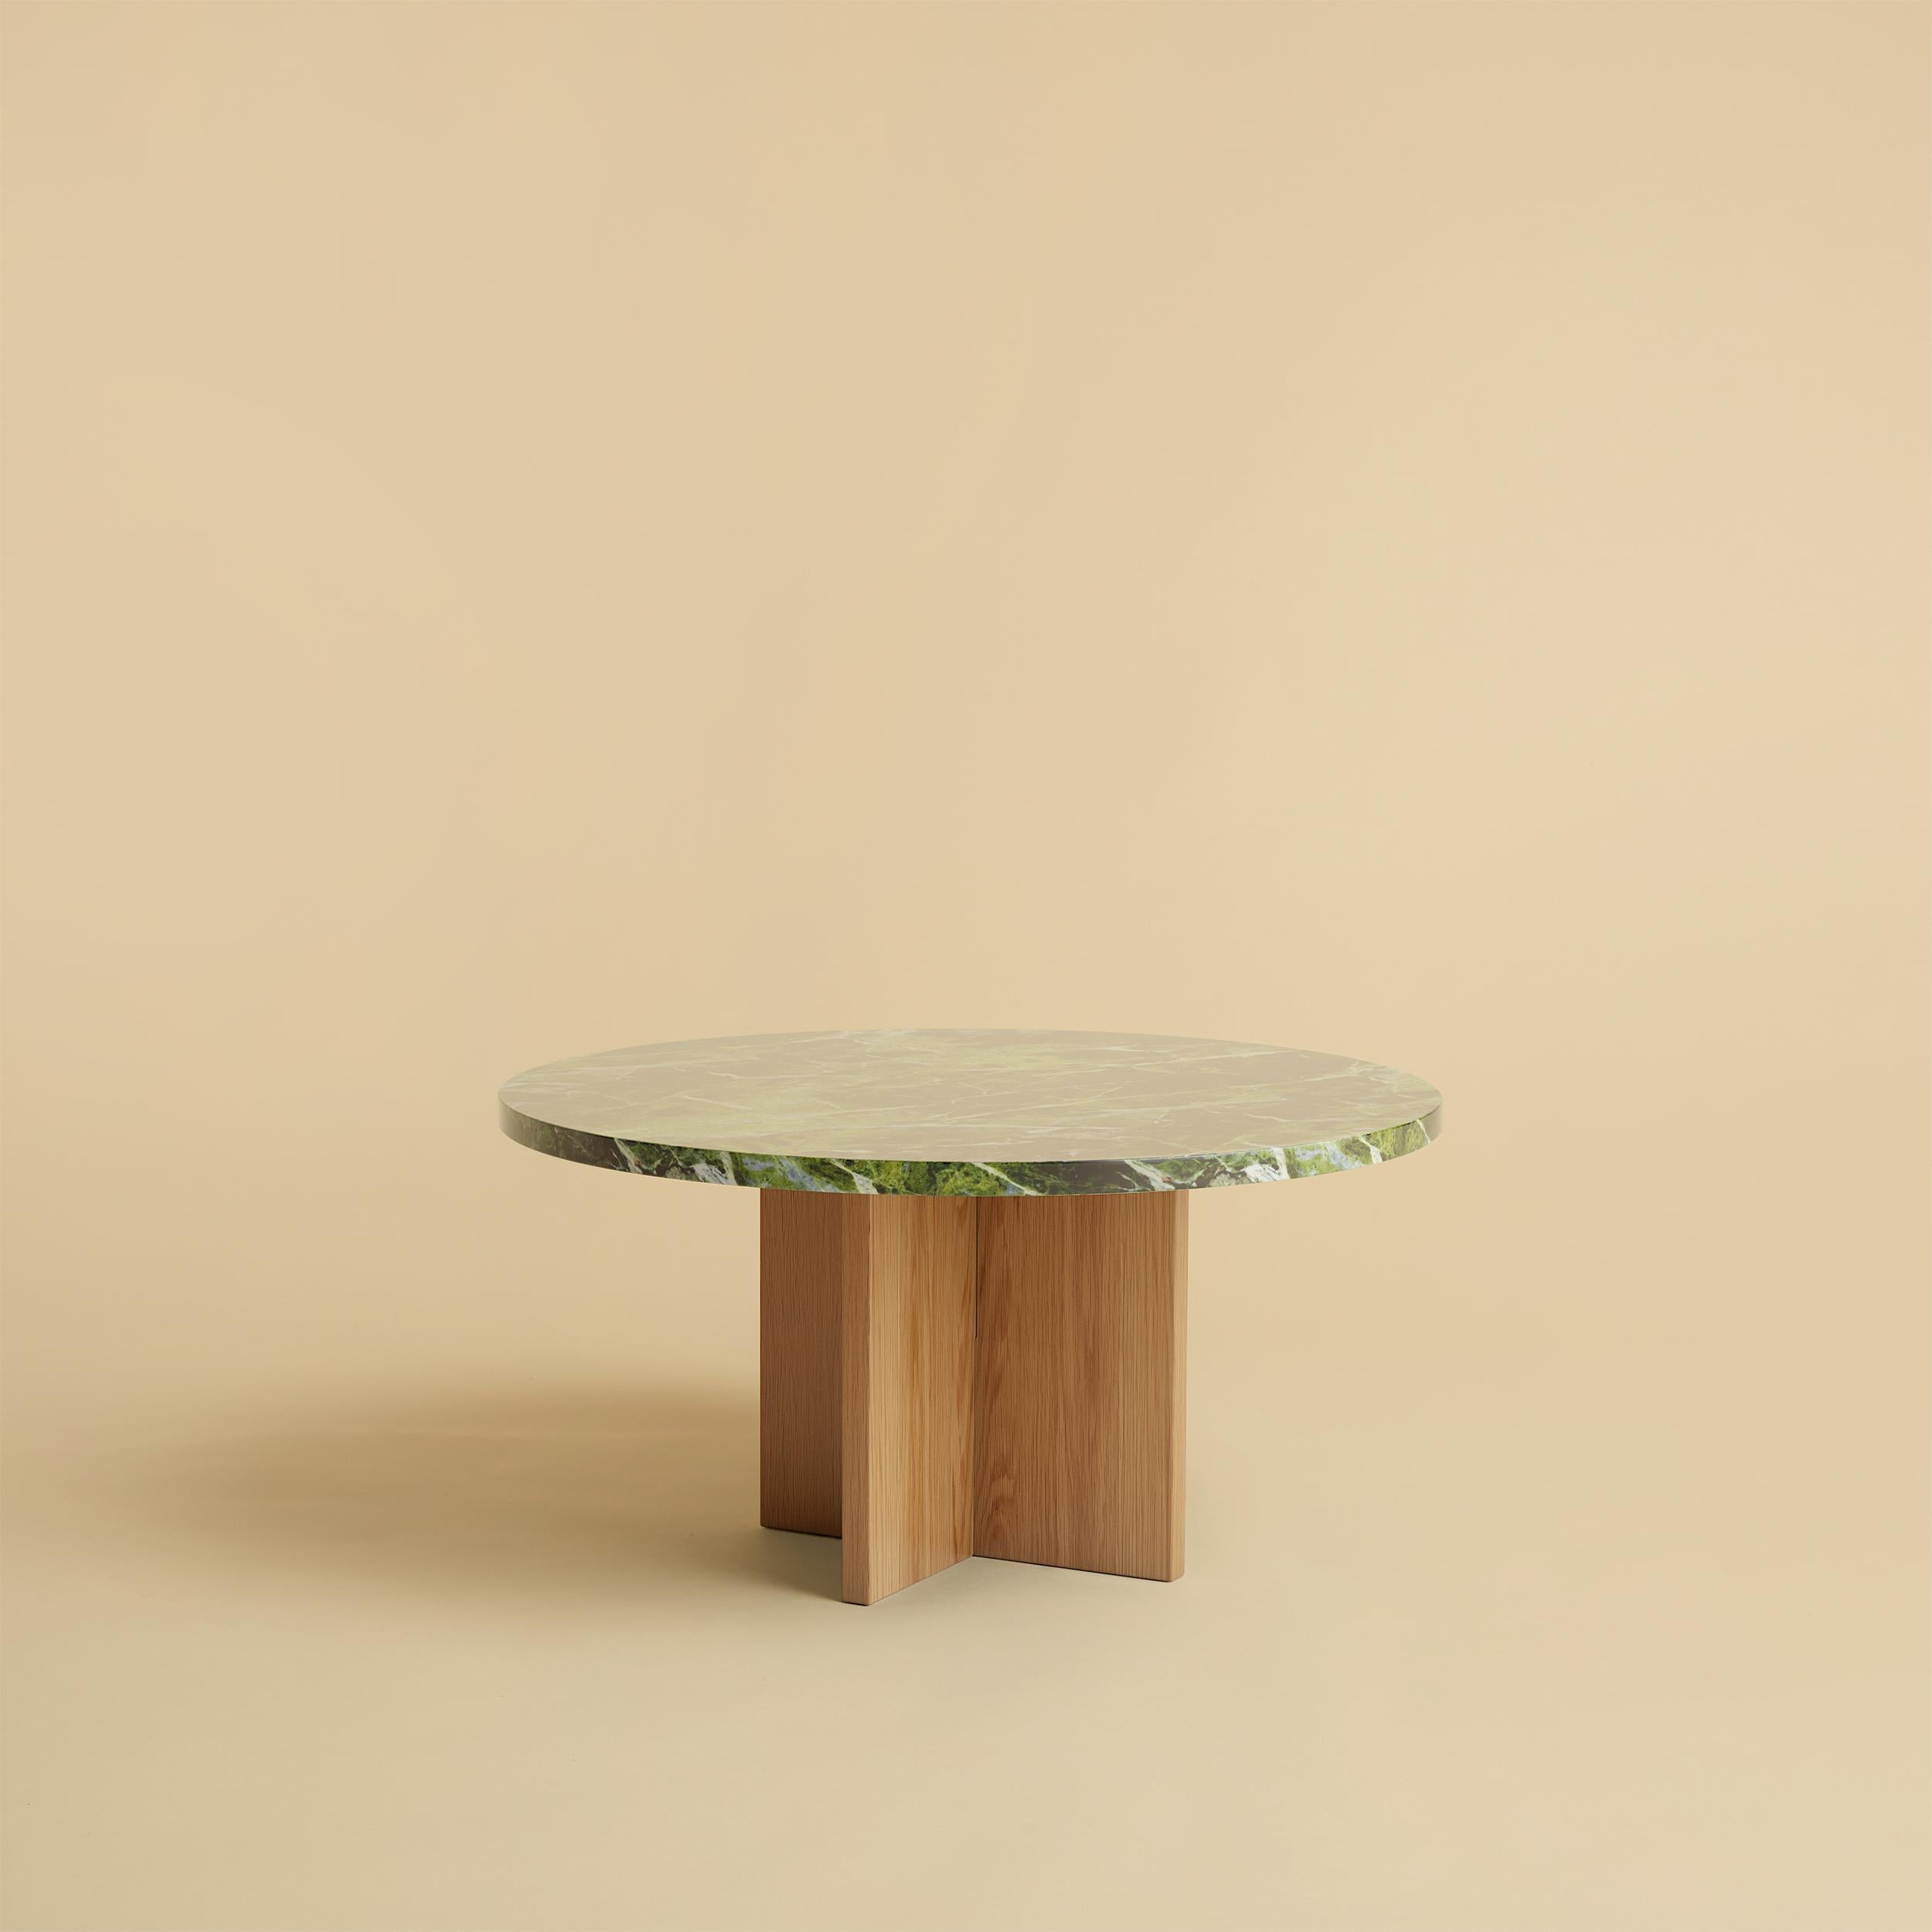 The Tinian coffee table is produced with an oak wood base and Verde Tifone marble top. The top is circular and 60cm in diameter, while the base is obtained by gluing oak planks perpendicular to each other.
Artisanal production made of technological